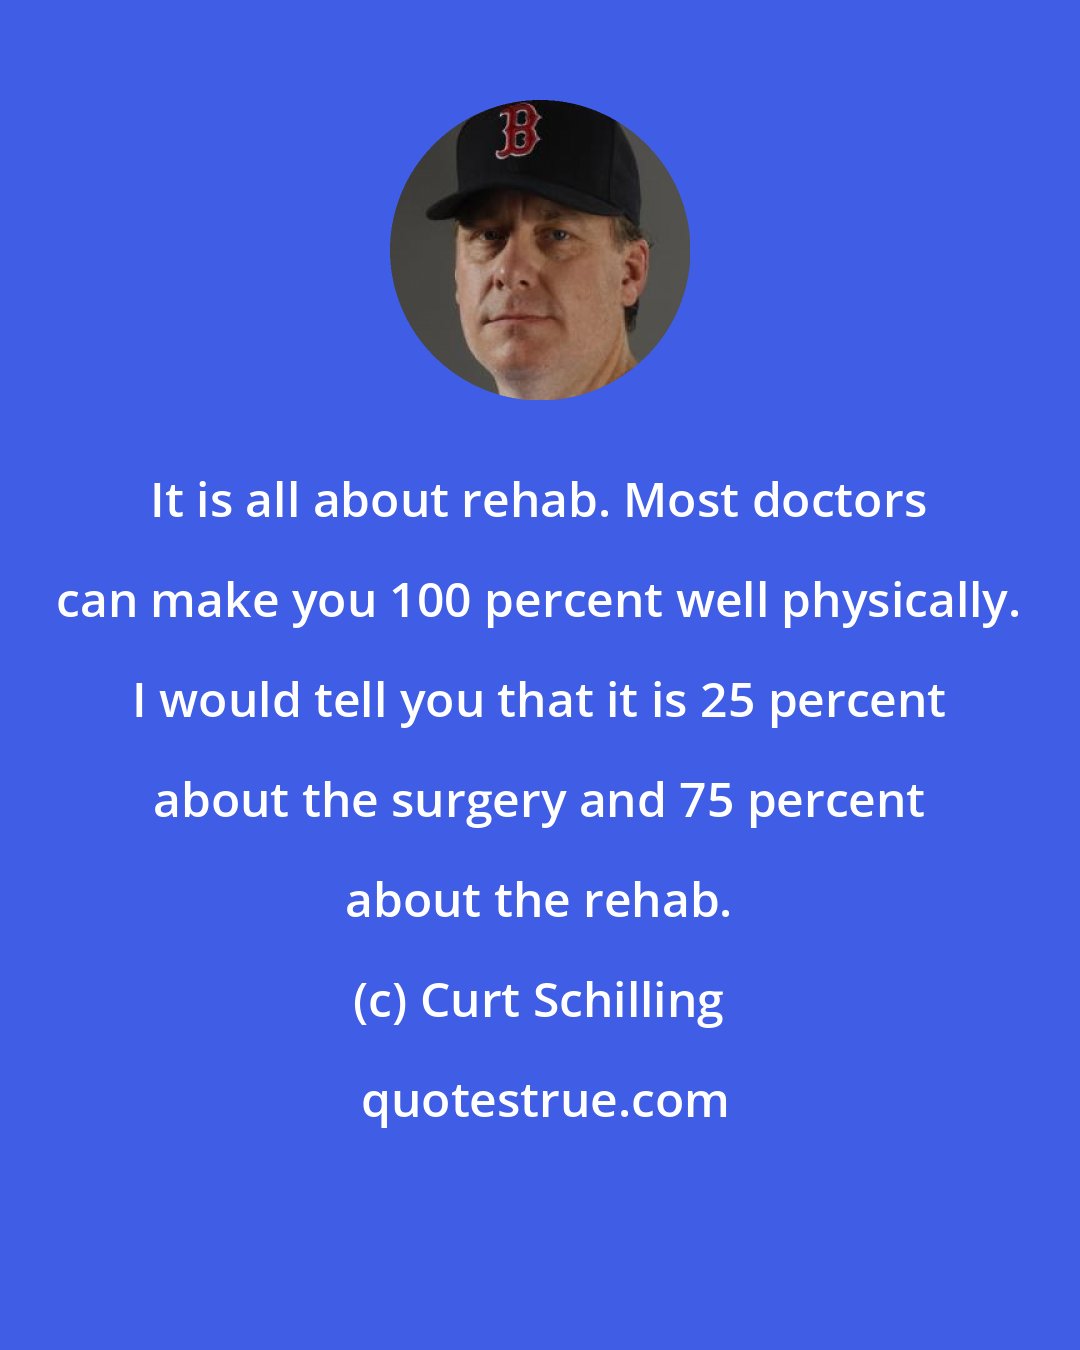 Curt Schilling: It is all about rehab. Most doctors can make you 100 percent well physically. I would tell you that it is 25 percent about the surgery and 75 percent about the rehab.